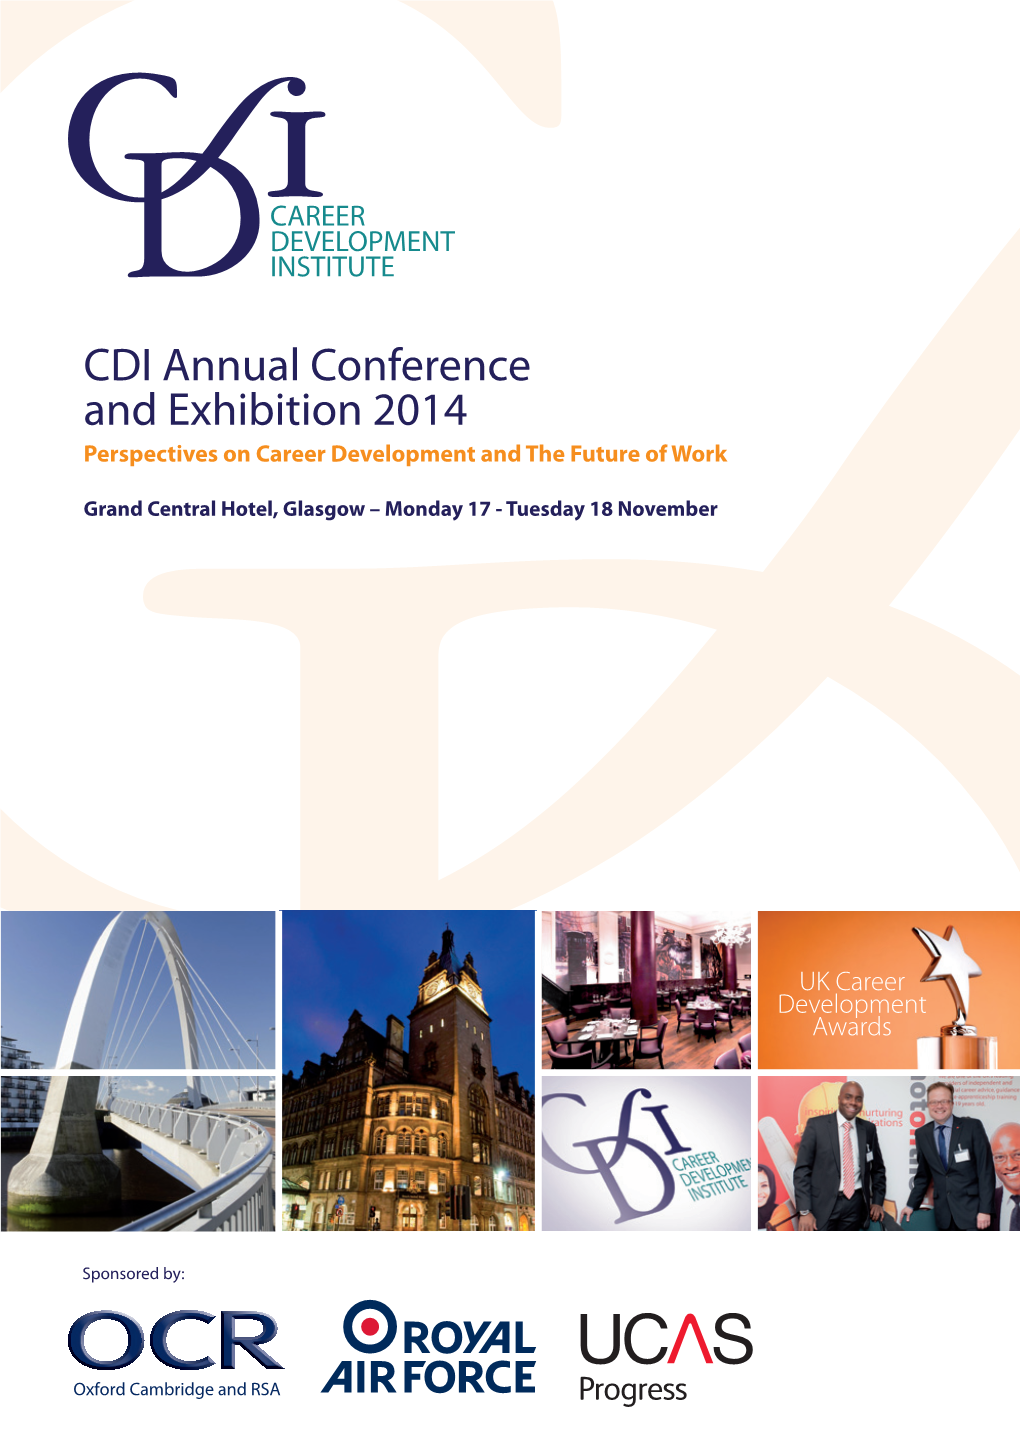 CDI Annual Conference and Exhibition 2014 Perspectives on Career Development and the Future of Work